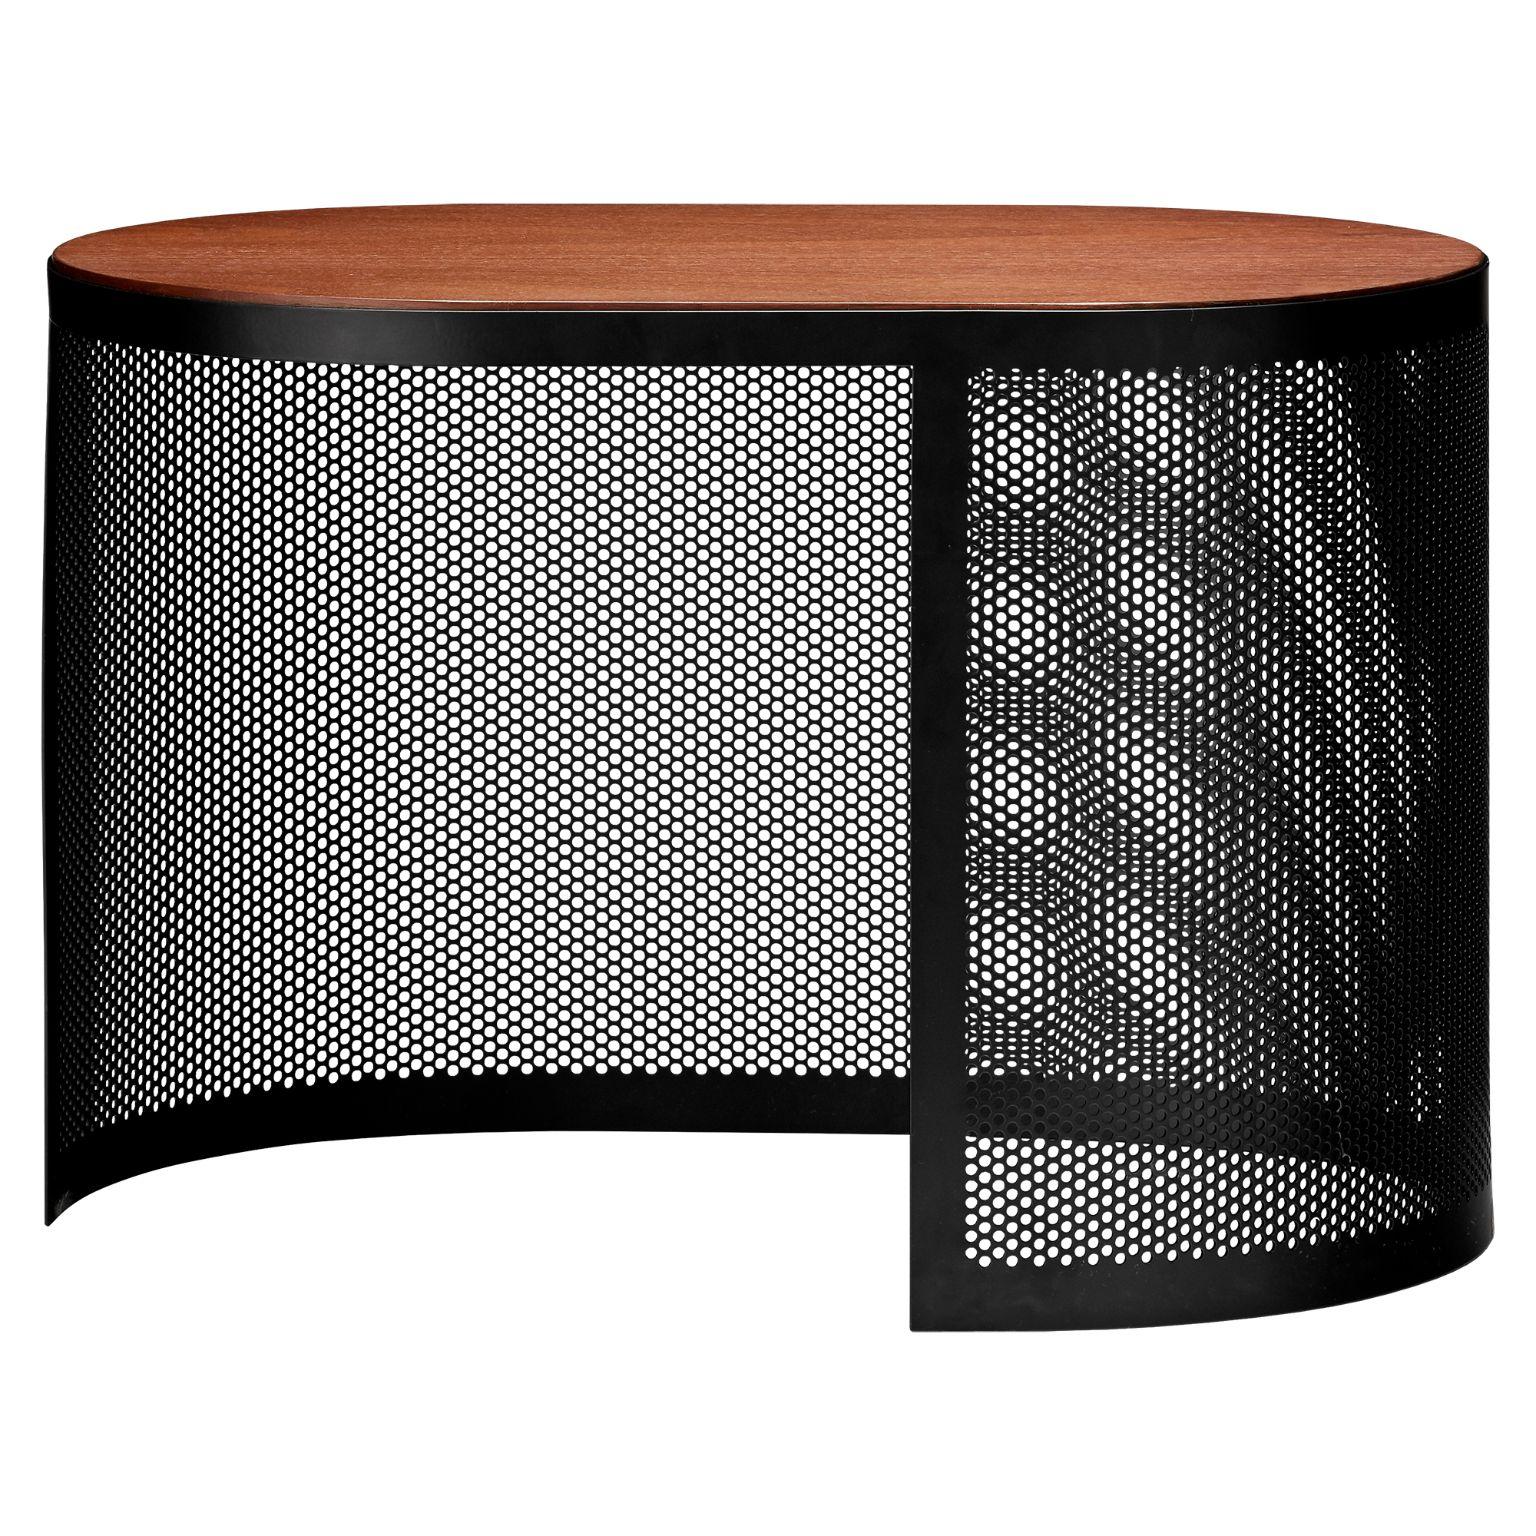 Walnut and steel contemporary medium side table
Dimensions: L 55 x W 35 x H 36.5 CM
Materials: Walnut, steel 

This tables can be placed in any room that calls for extra creative space. They are made of perforated metal in black and have either